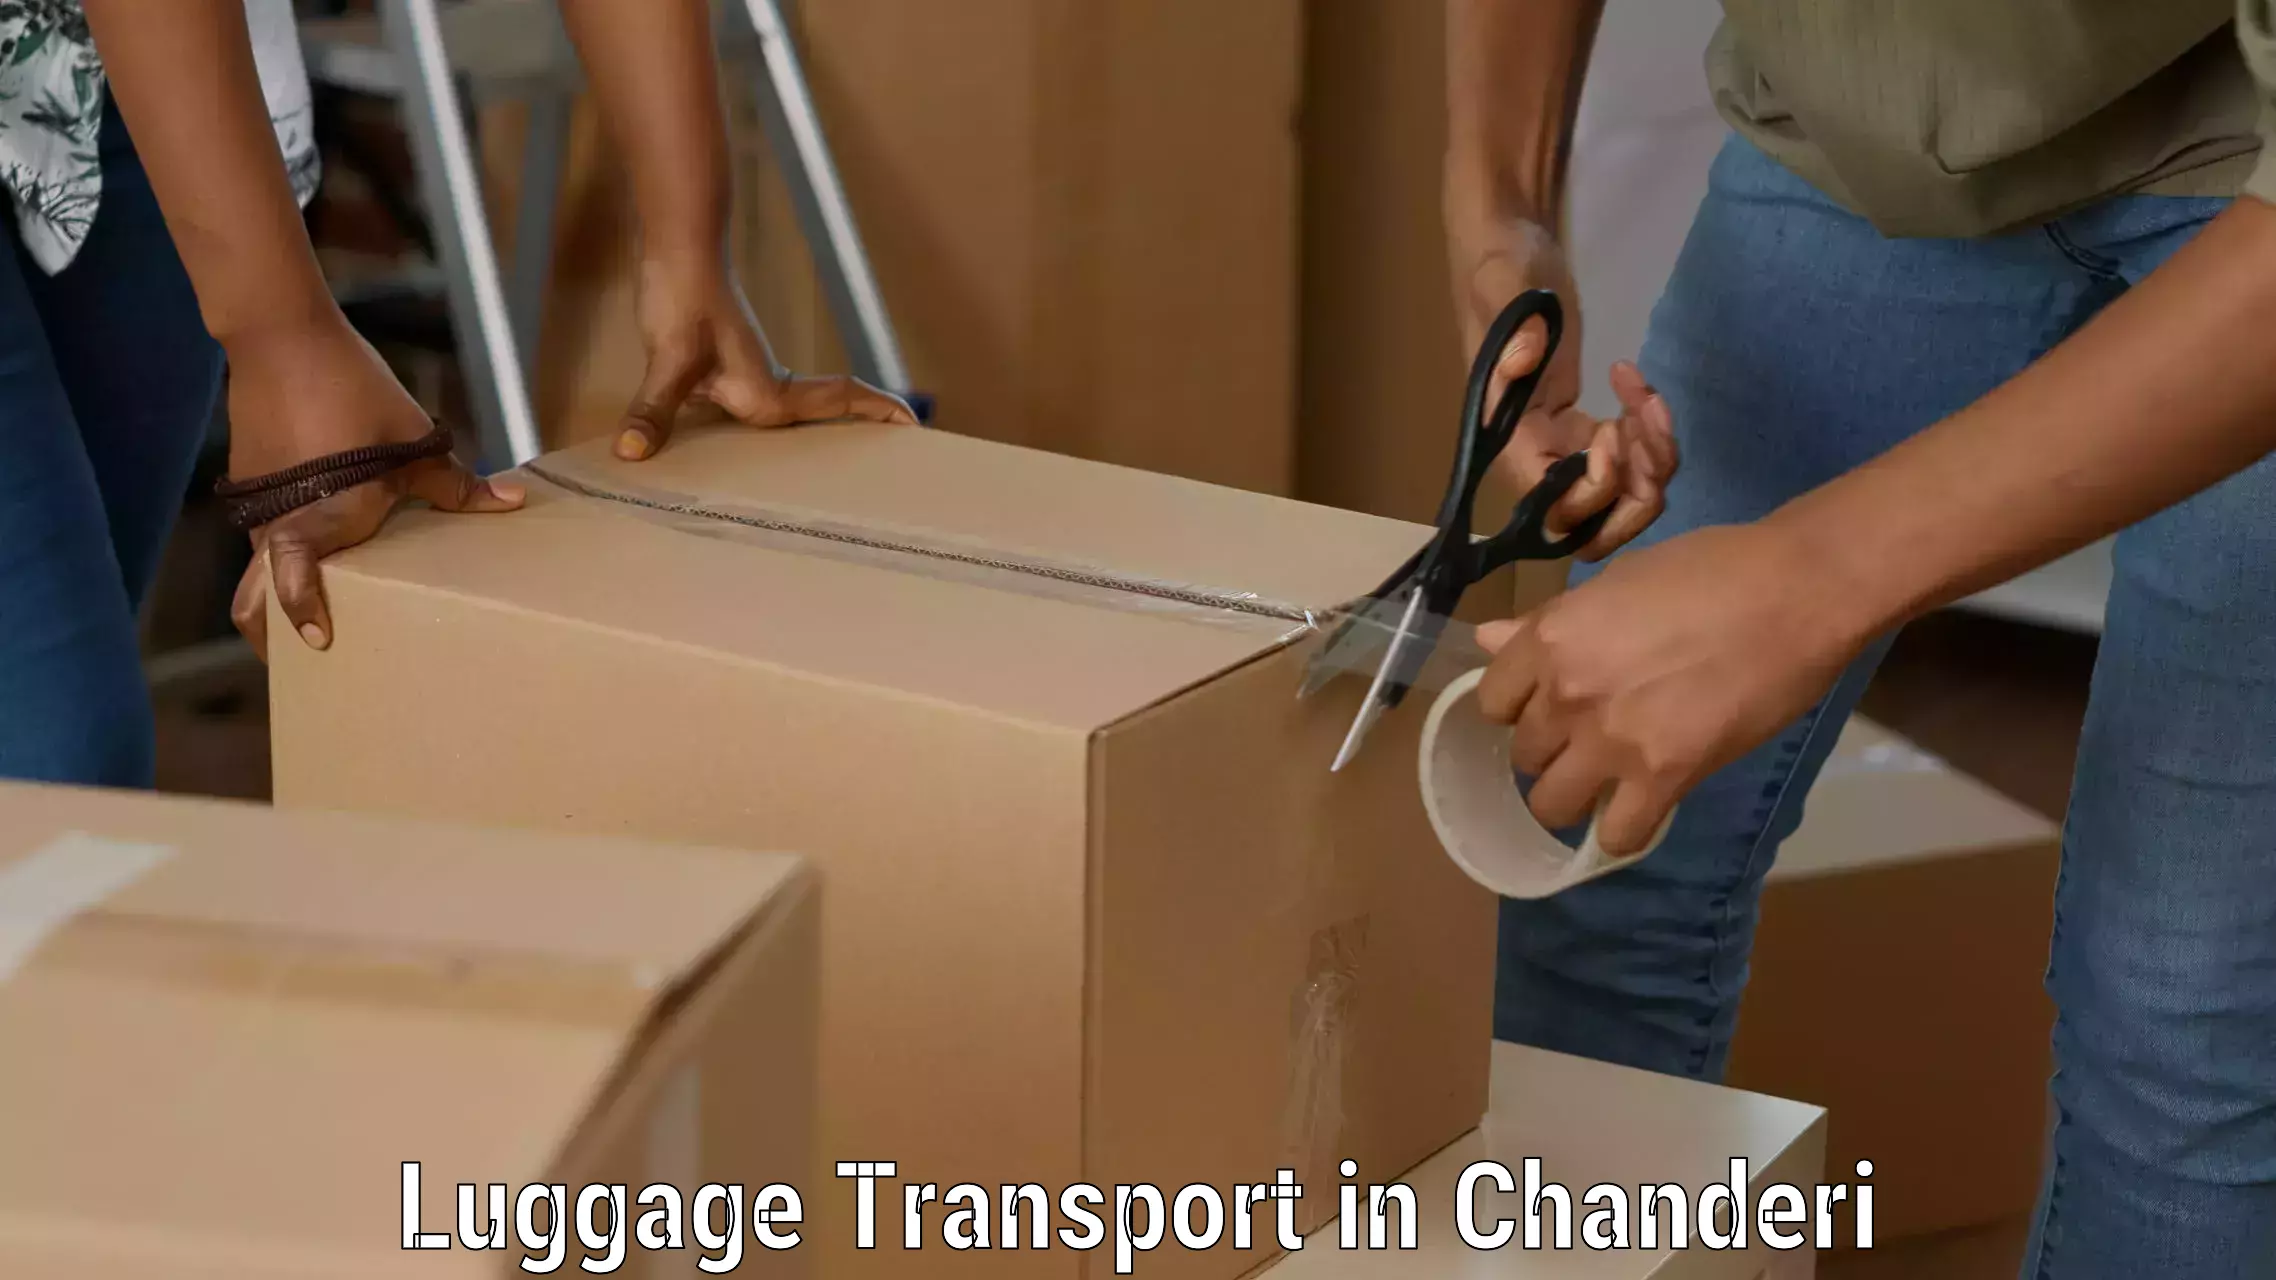 Luggage transport consulting in Chanderi